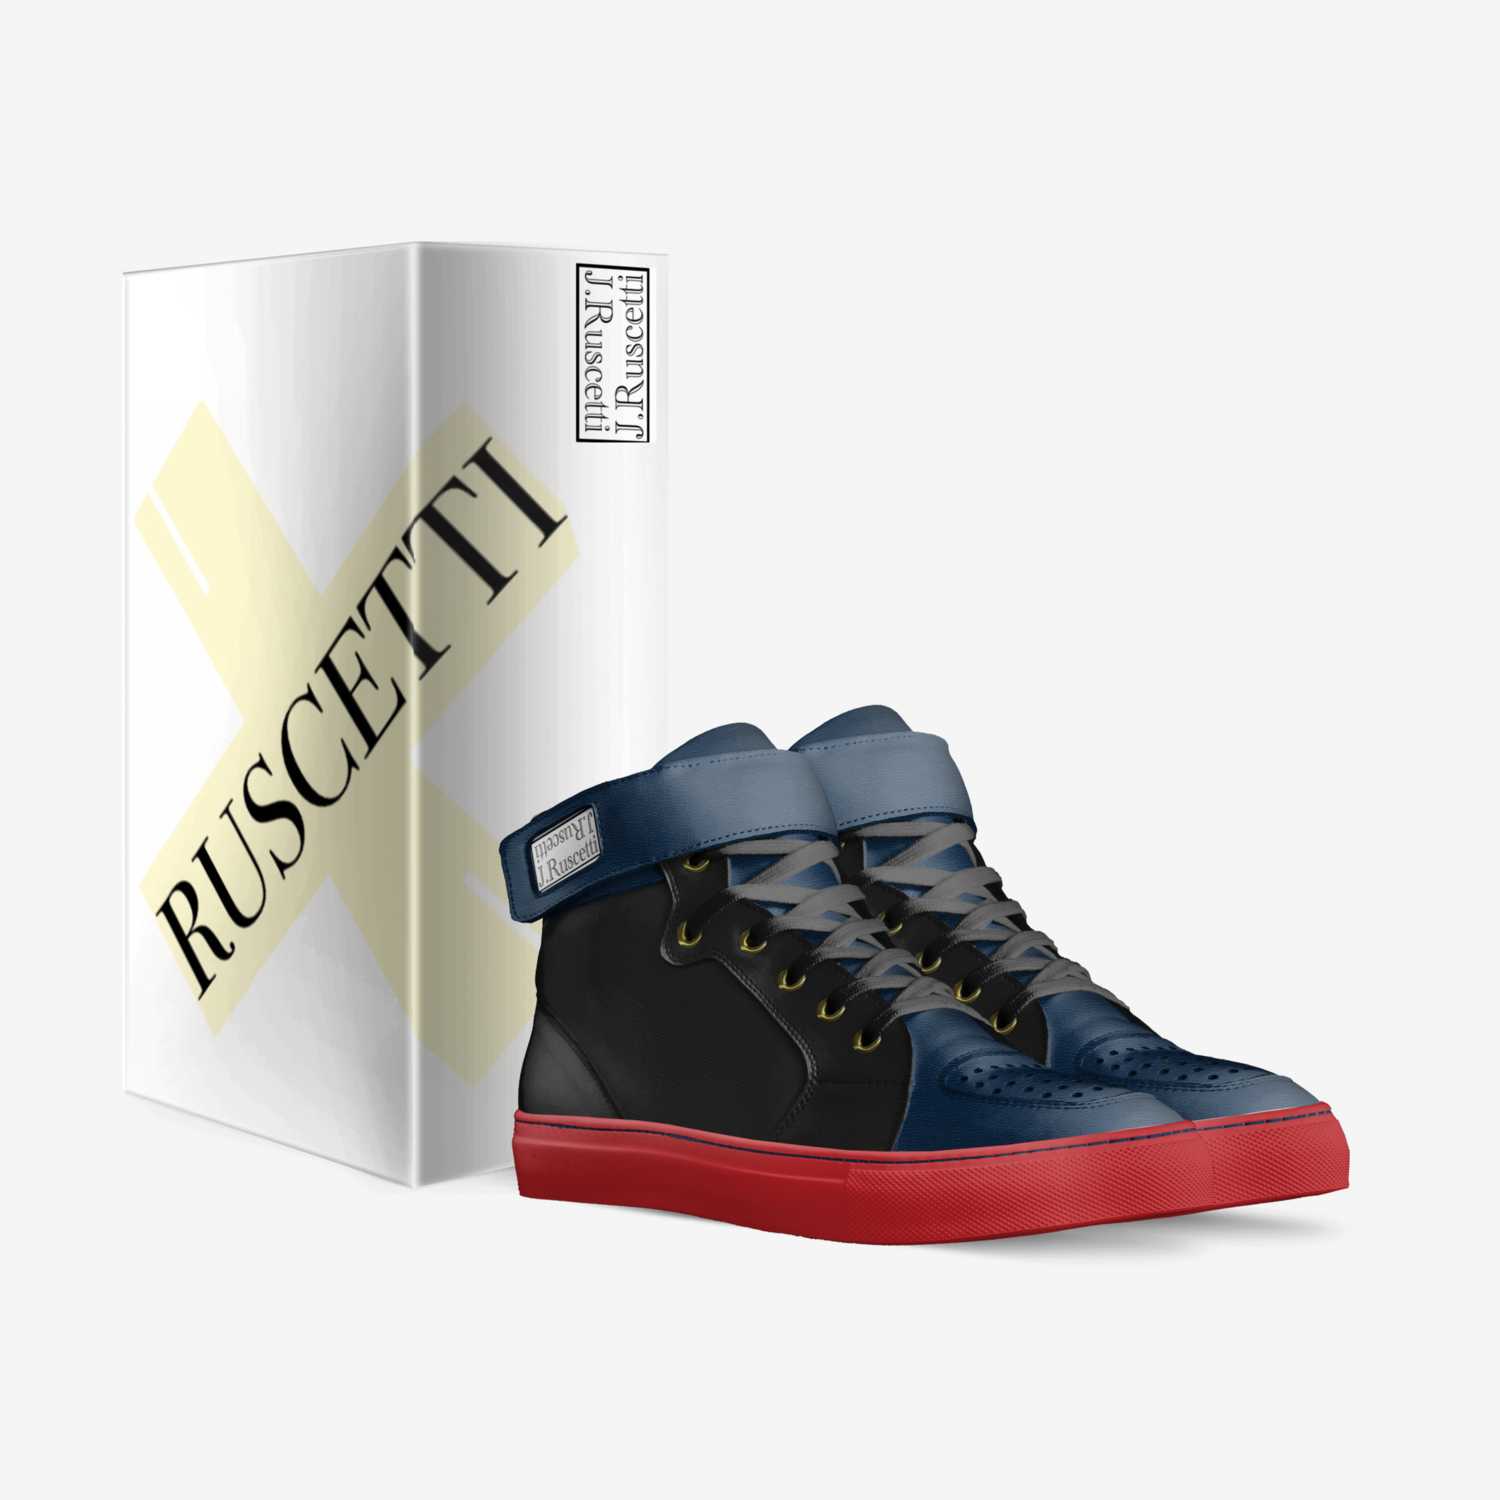 RUSCETTI custom made in Italy shoes by Joe | Box view